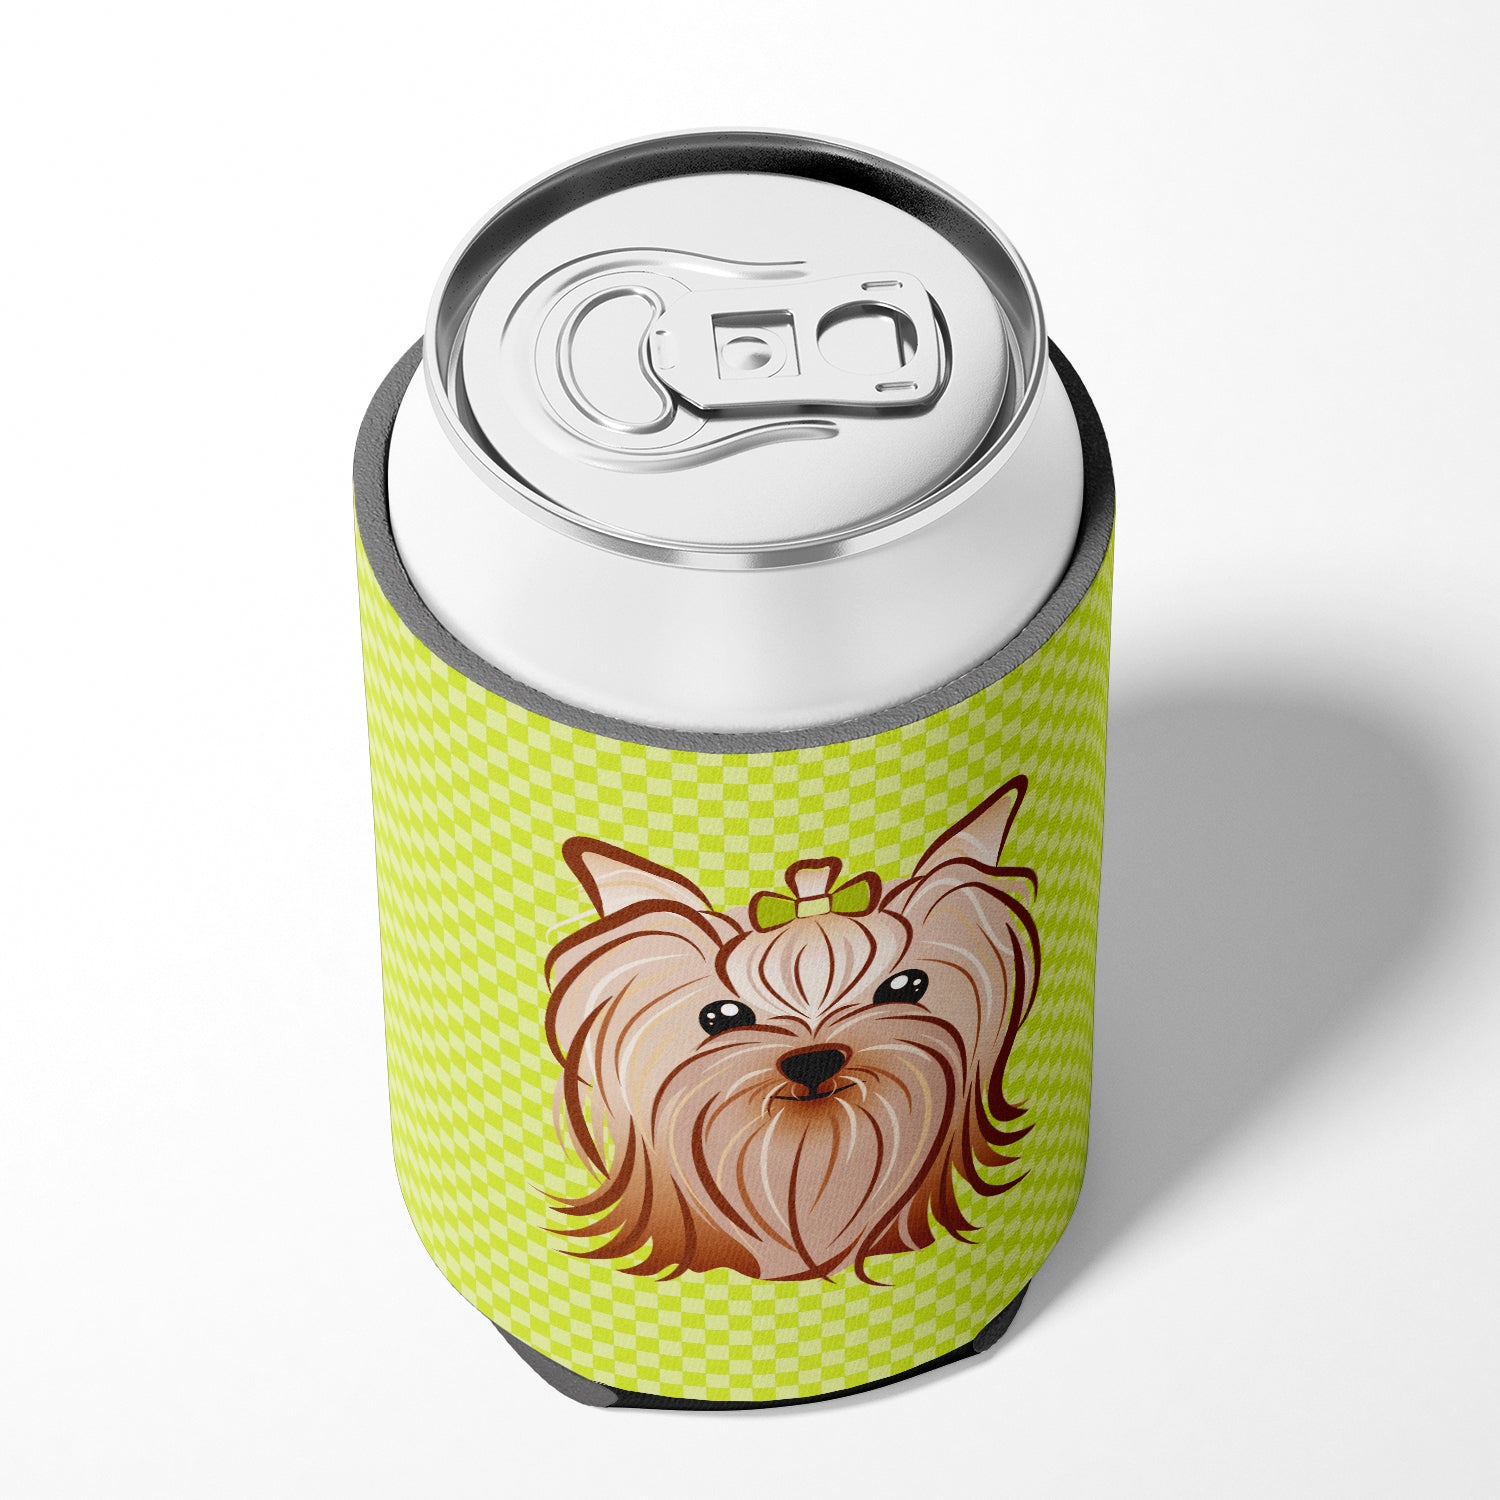 Checkerboard Lime Green Yorkie Yorkshire Terrier Can or Bottle Hugger BB1266CC.